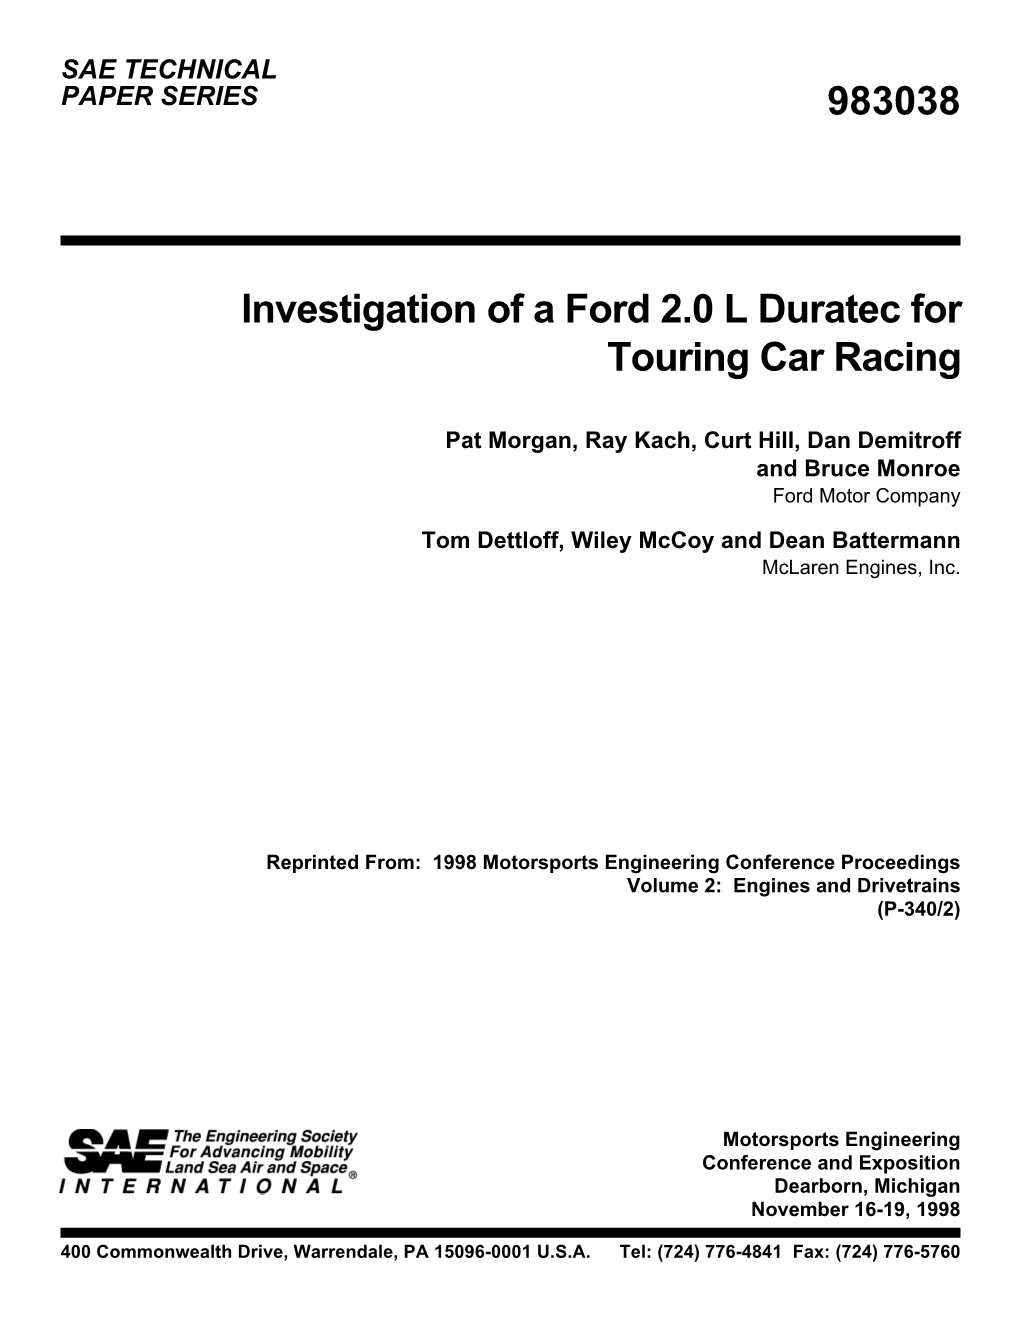 983038 Investigation of a Ford 2.0 L Duratec for Touring Car Racing